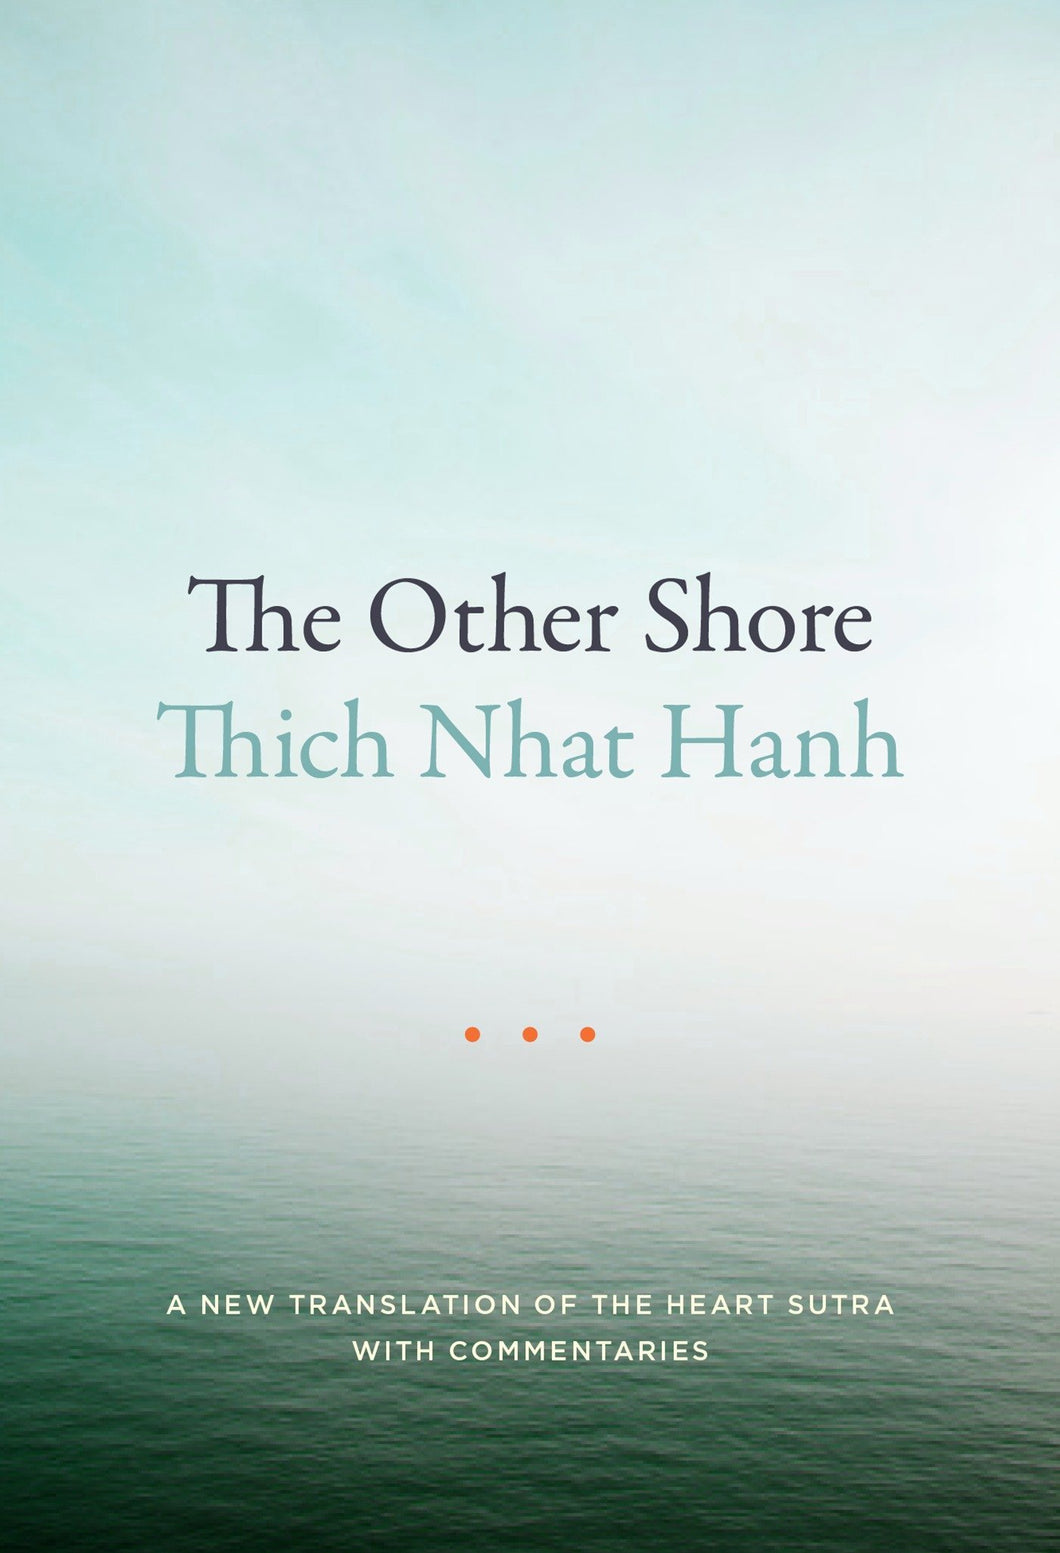 The Other Shore: A New Translation of the Heart Sutra with Commentaries [Thich Nhat Hanh]